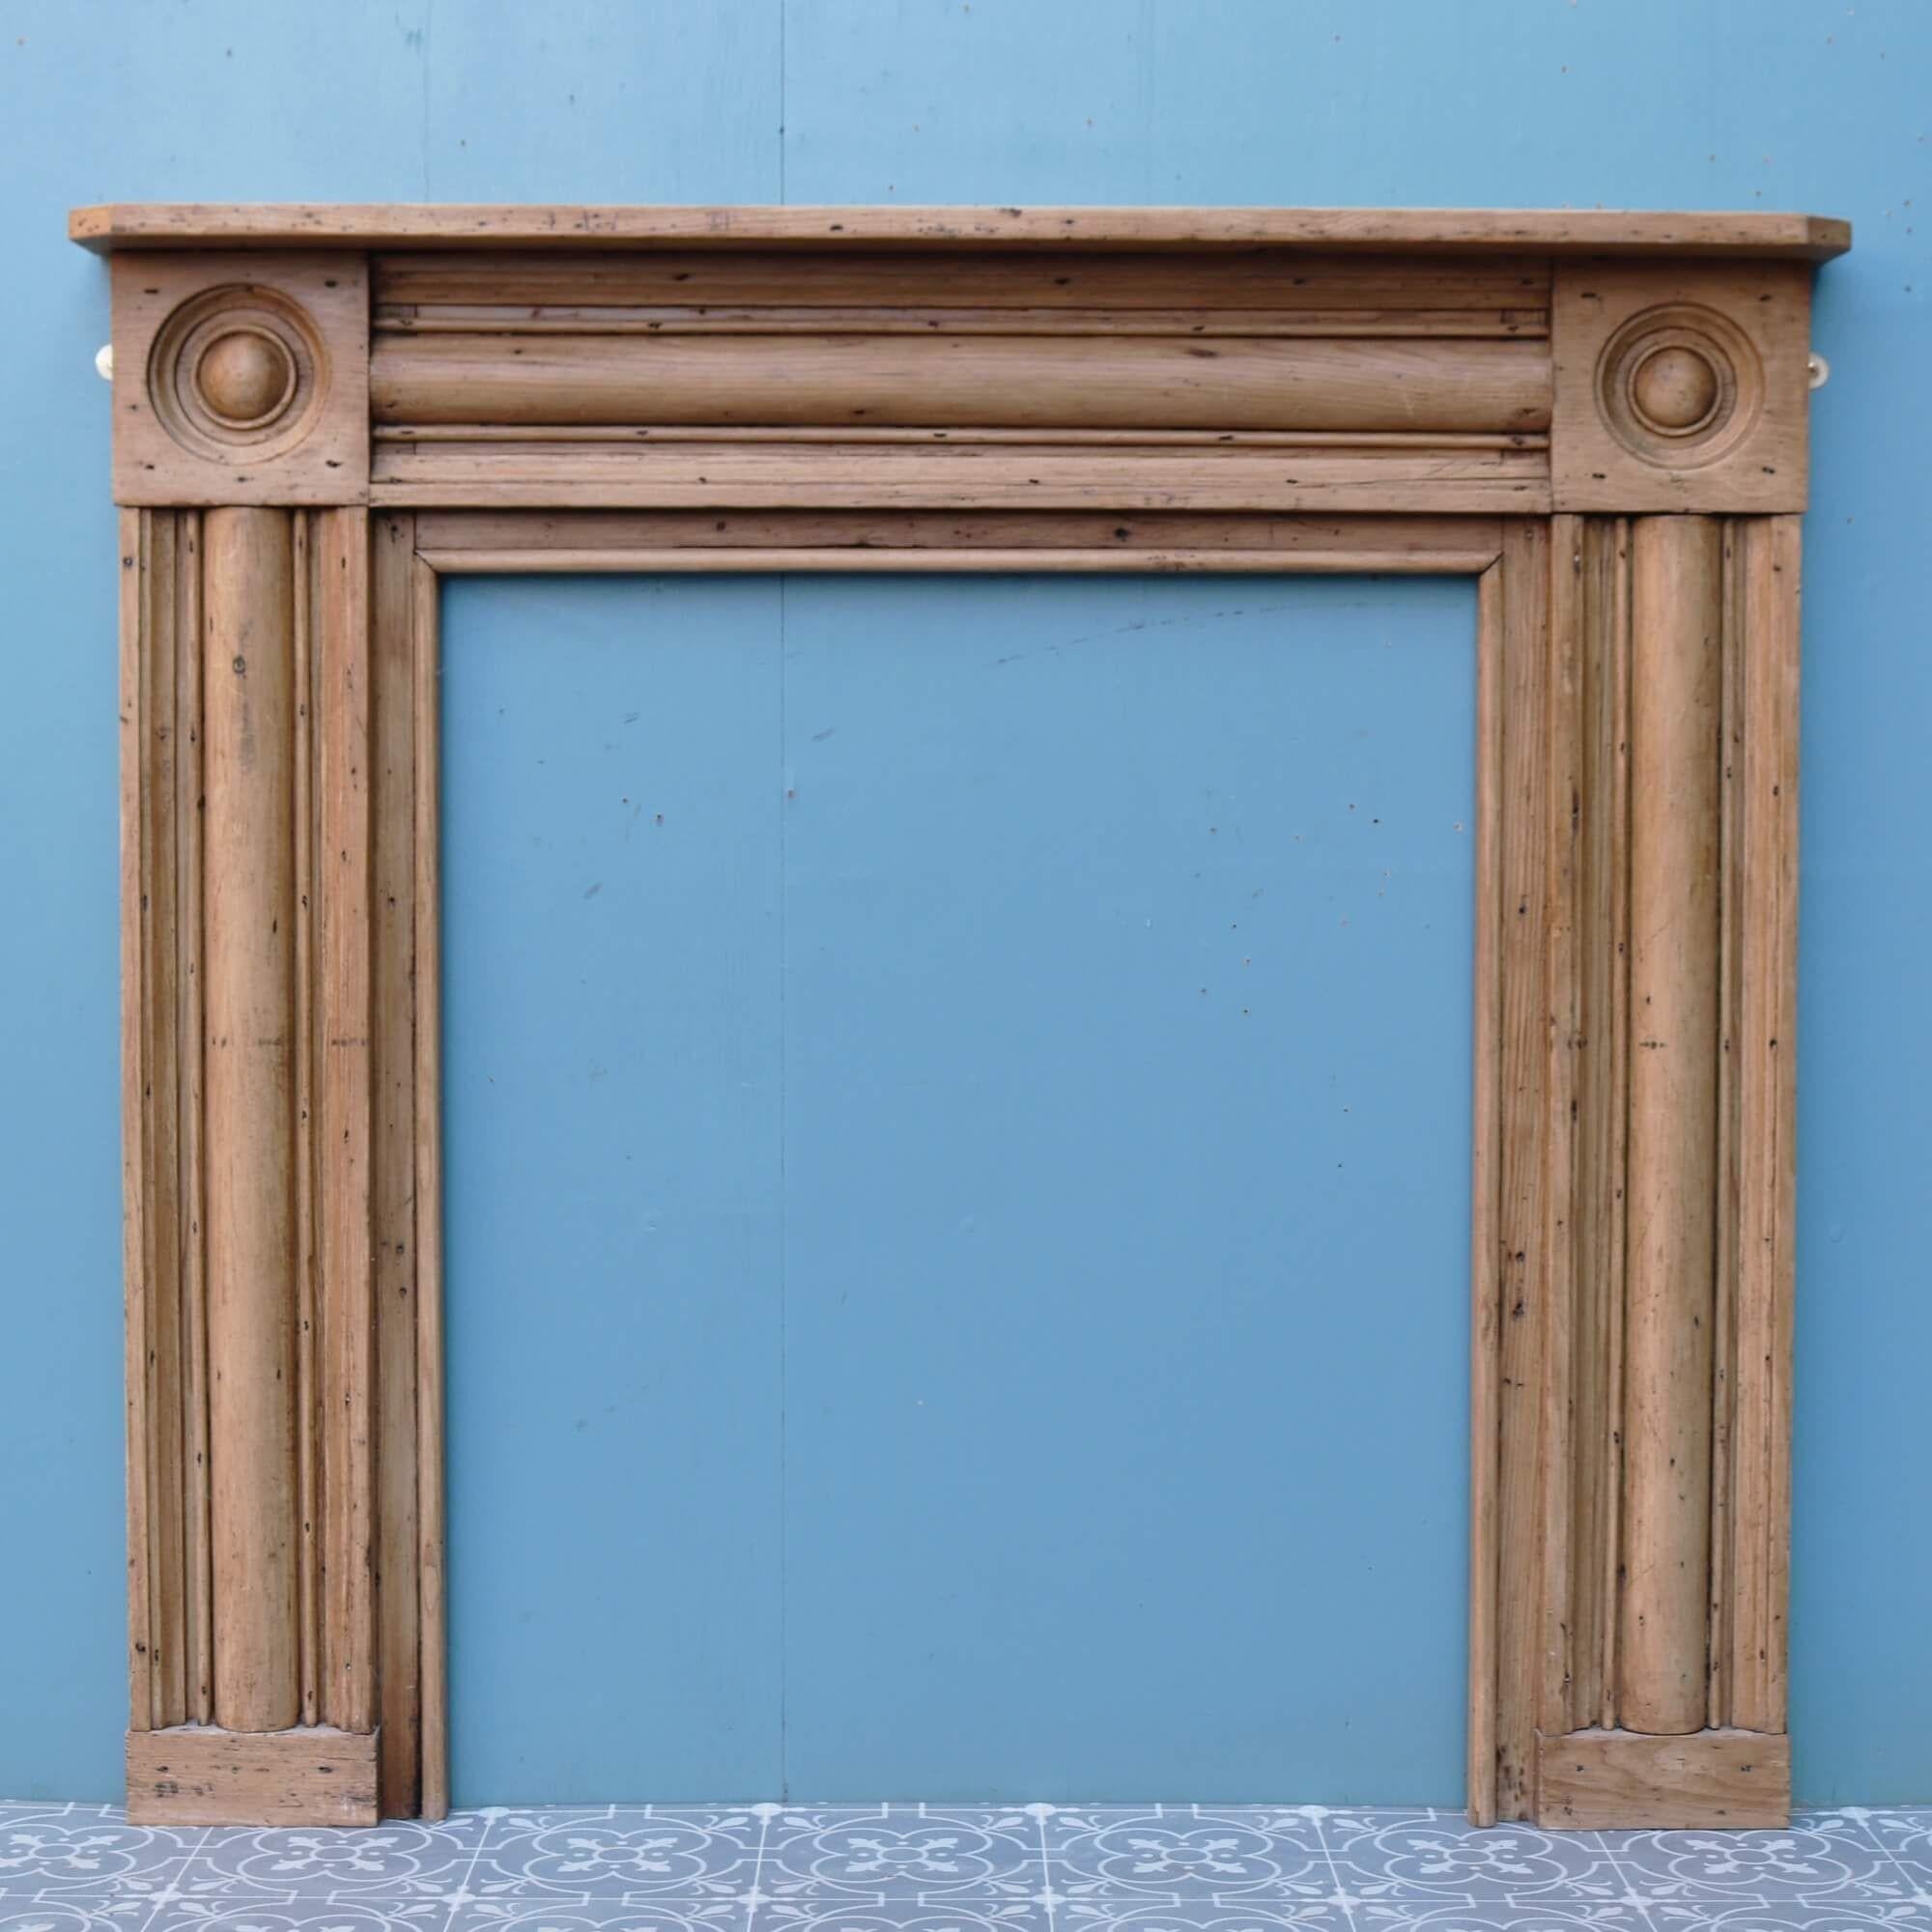 Antique Pine Regency Bullseye Fire Mantel In Fair Condition For Sale In Wormelow, Herefordshire